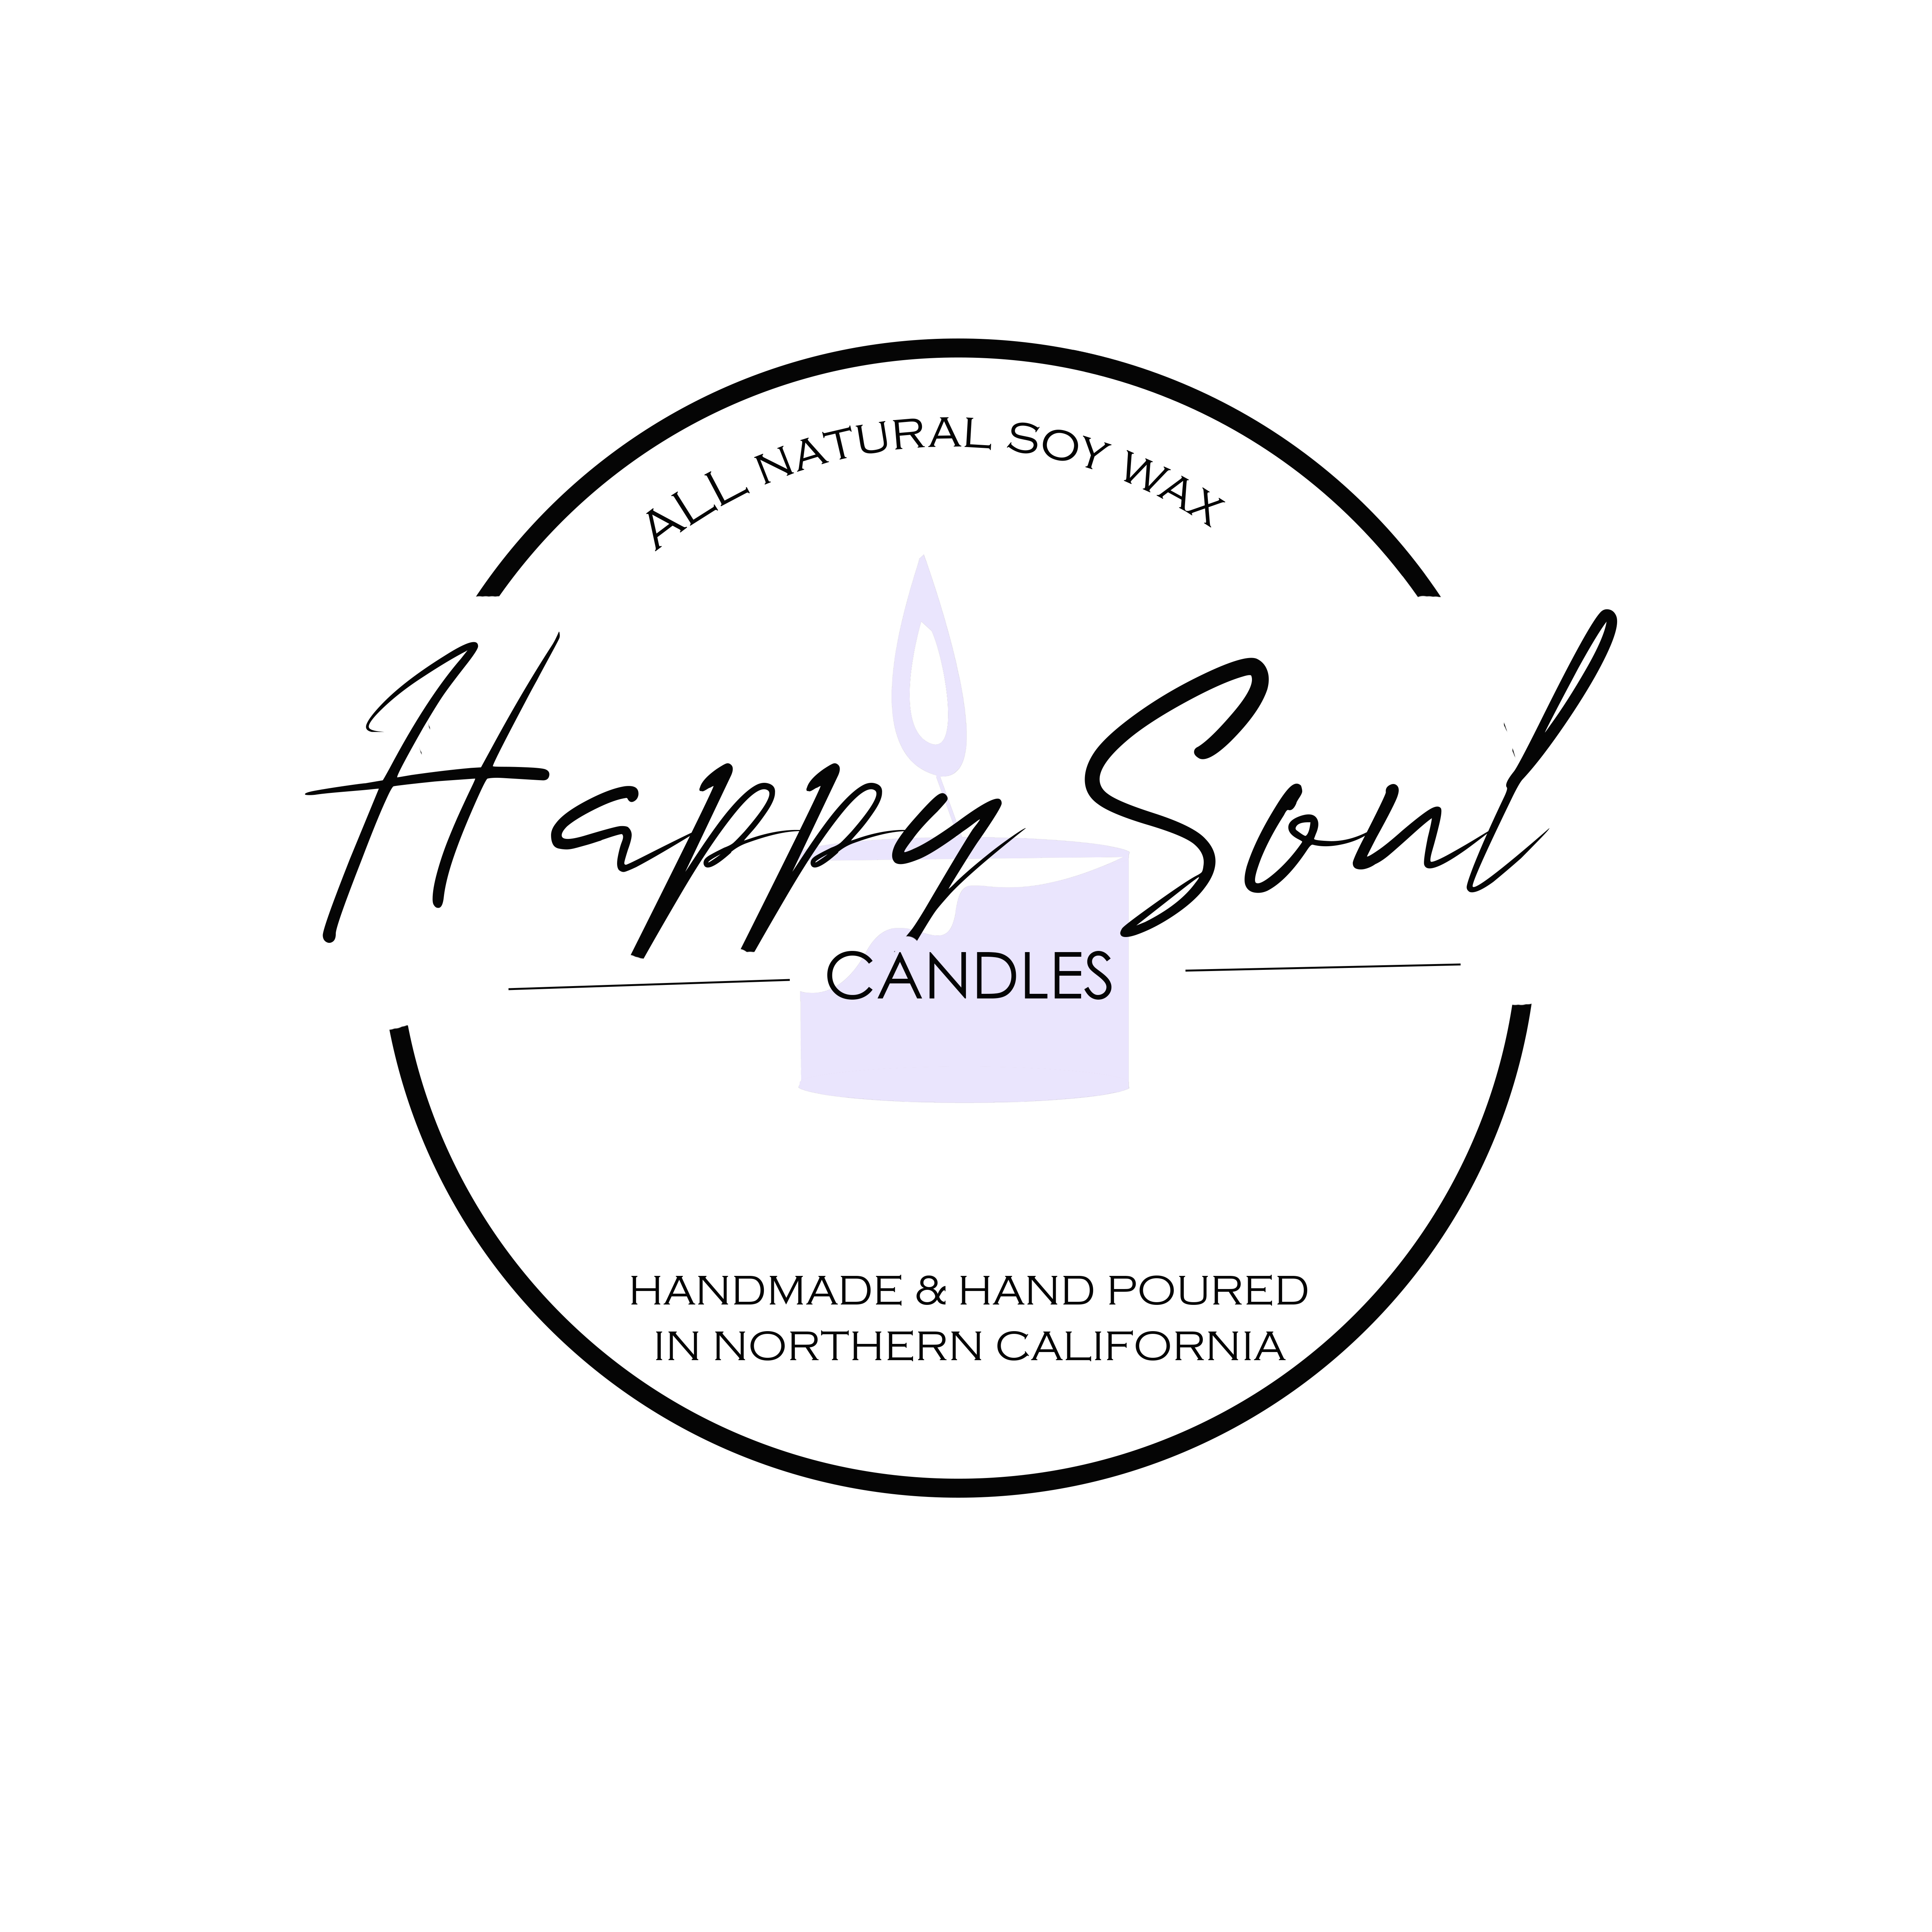 The logo or business face of "Happy Soul Candles"